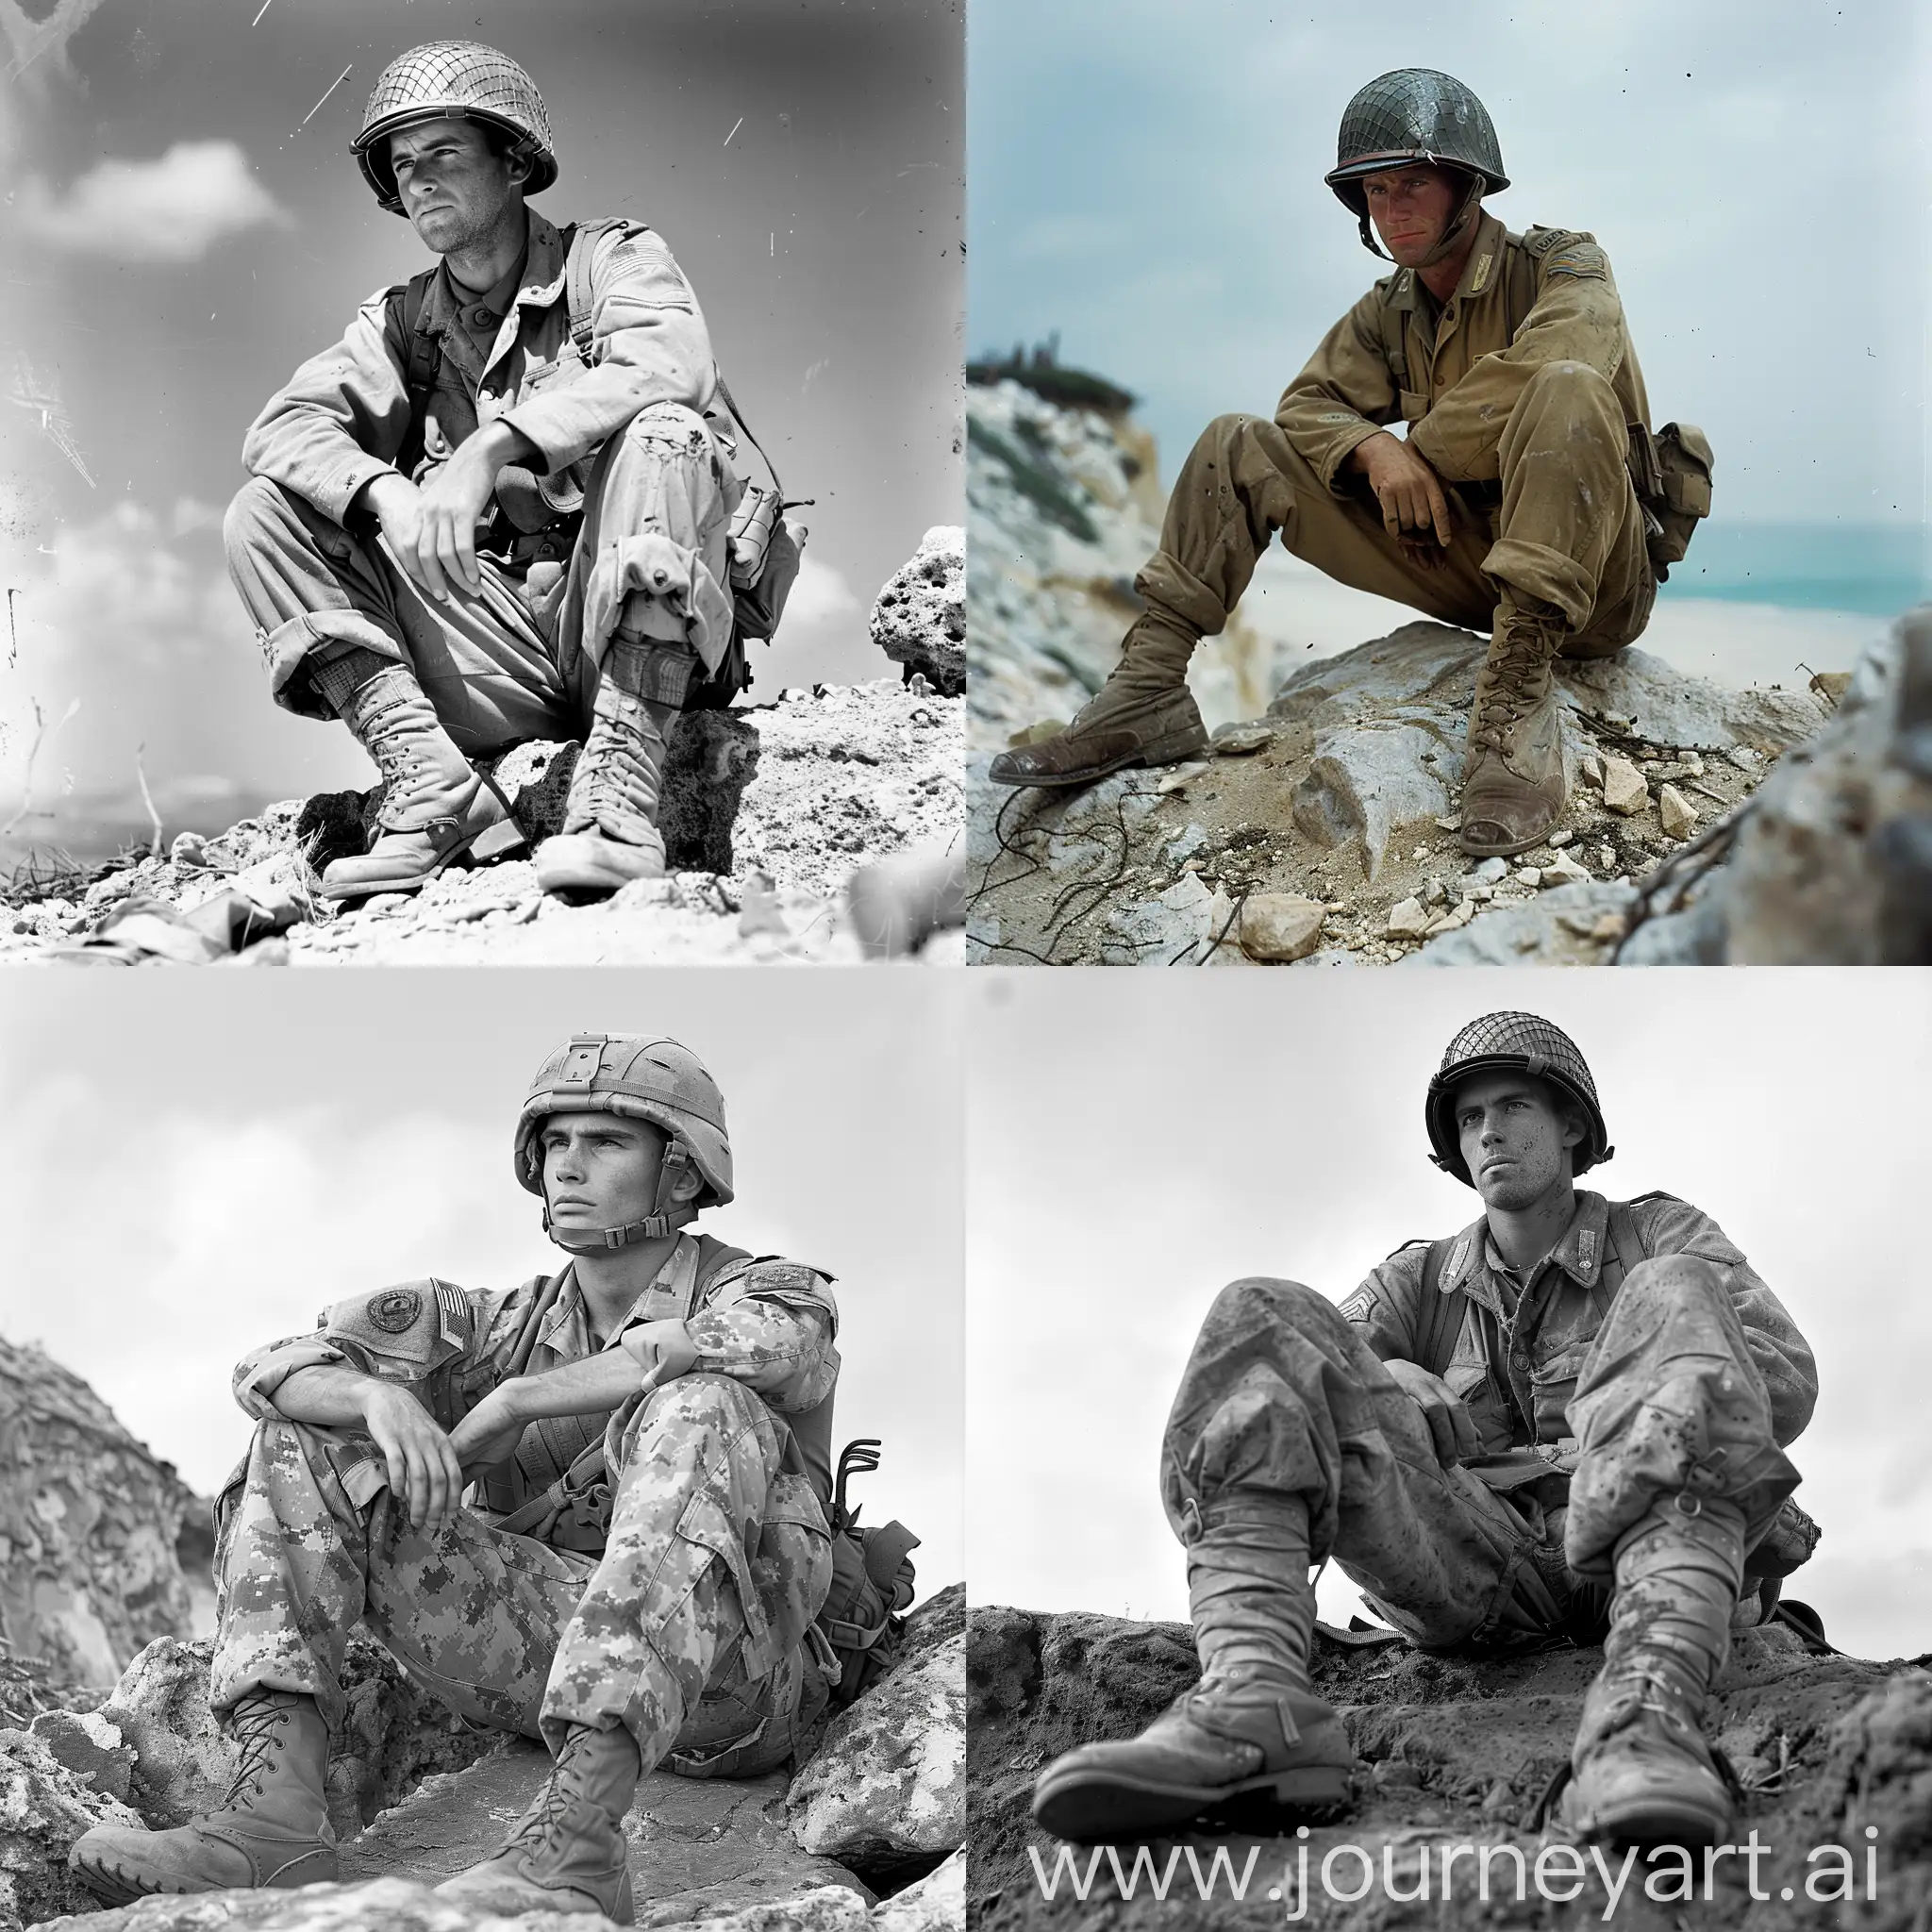 A soldier wearing a military uniform and helmet sits on a rock with his legs together and leaning slightly to the left